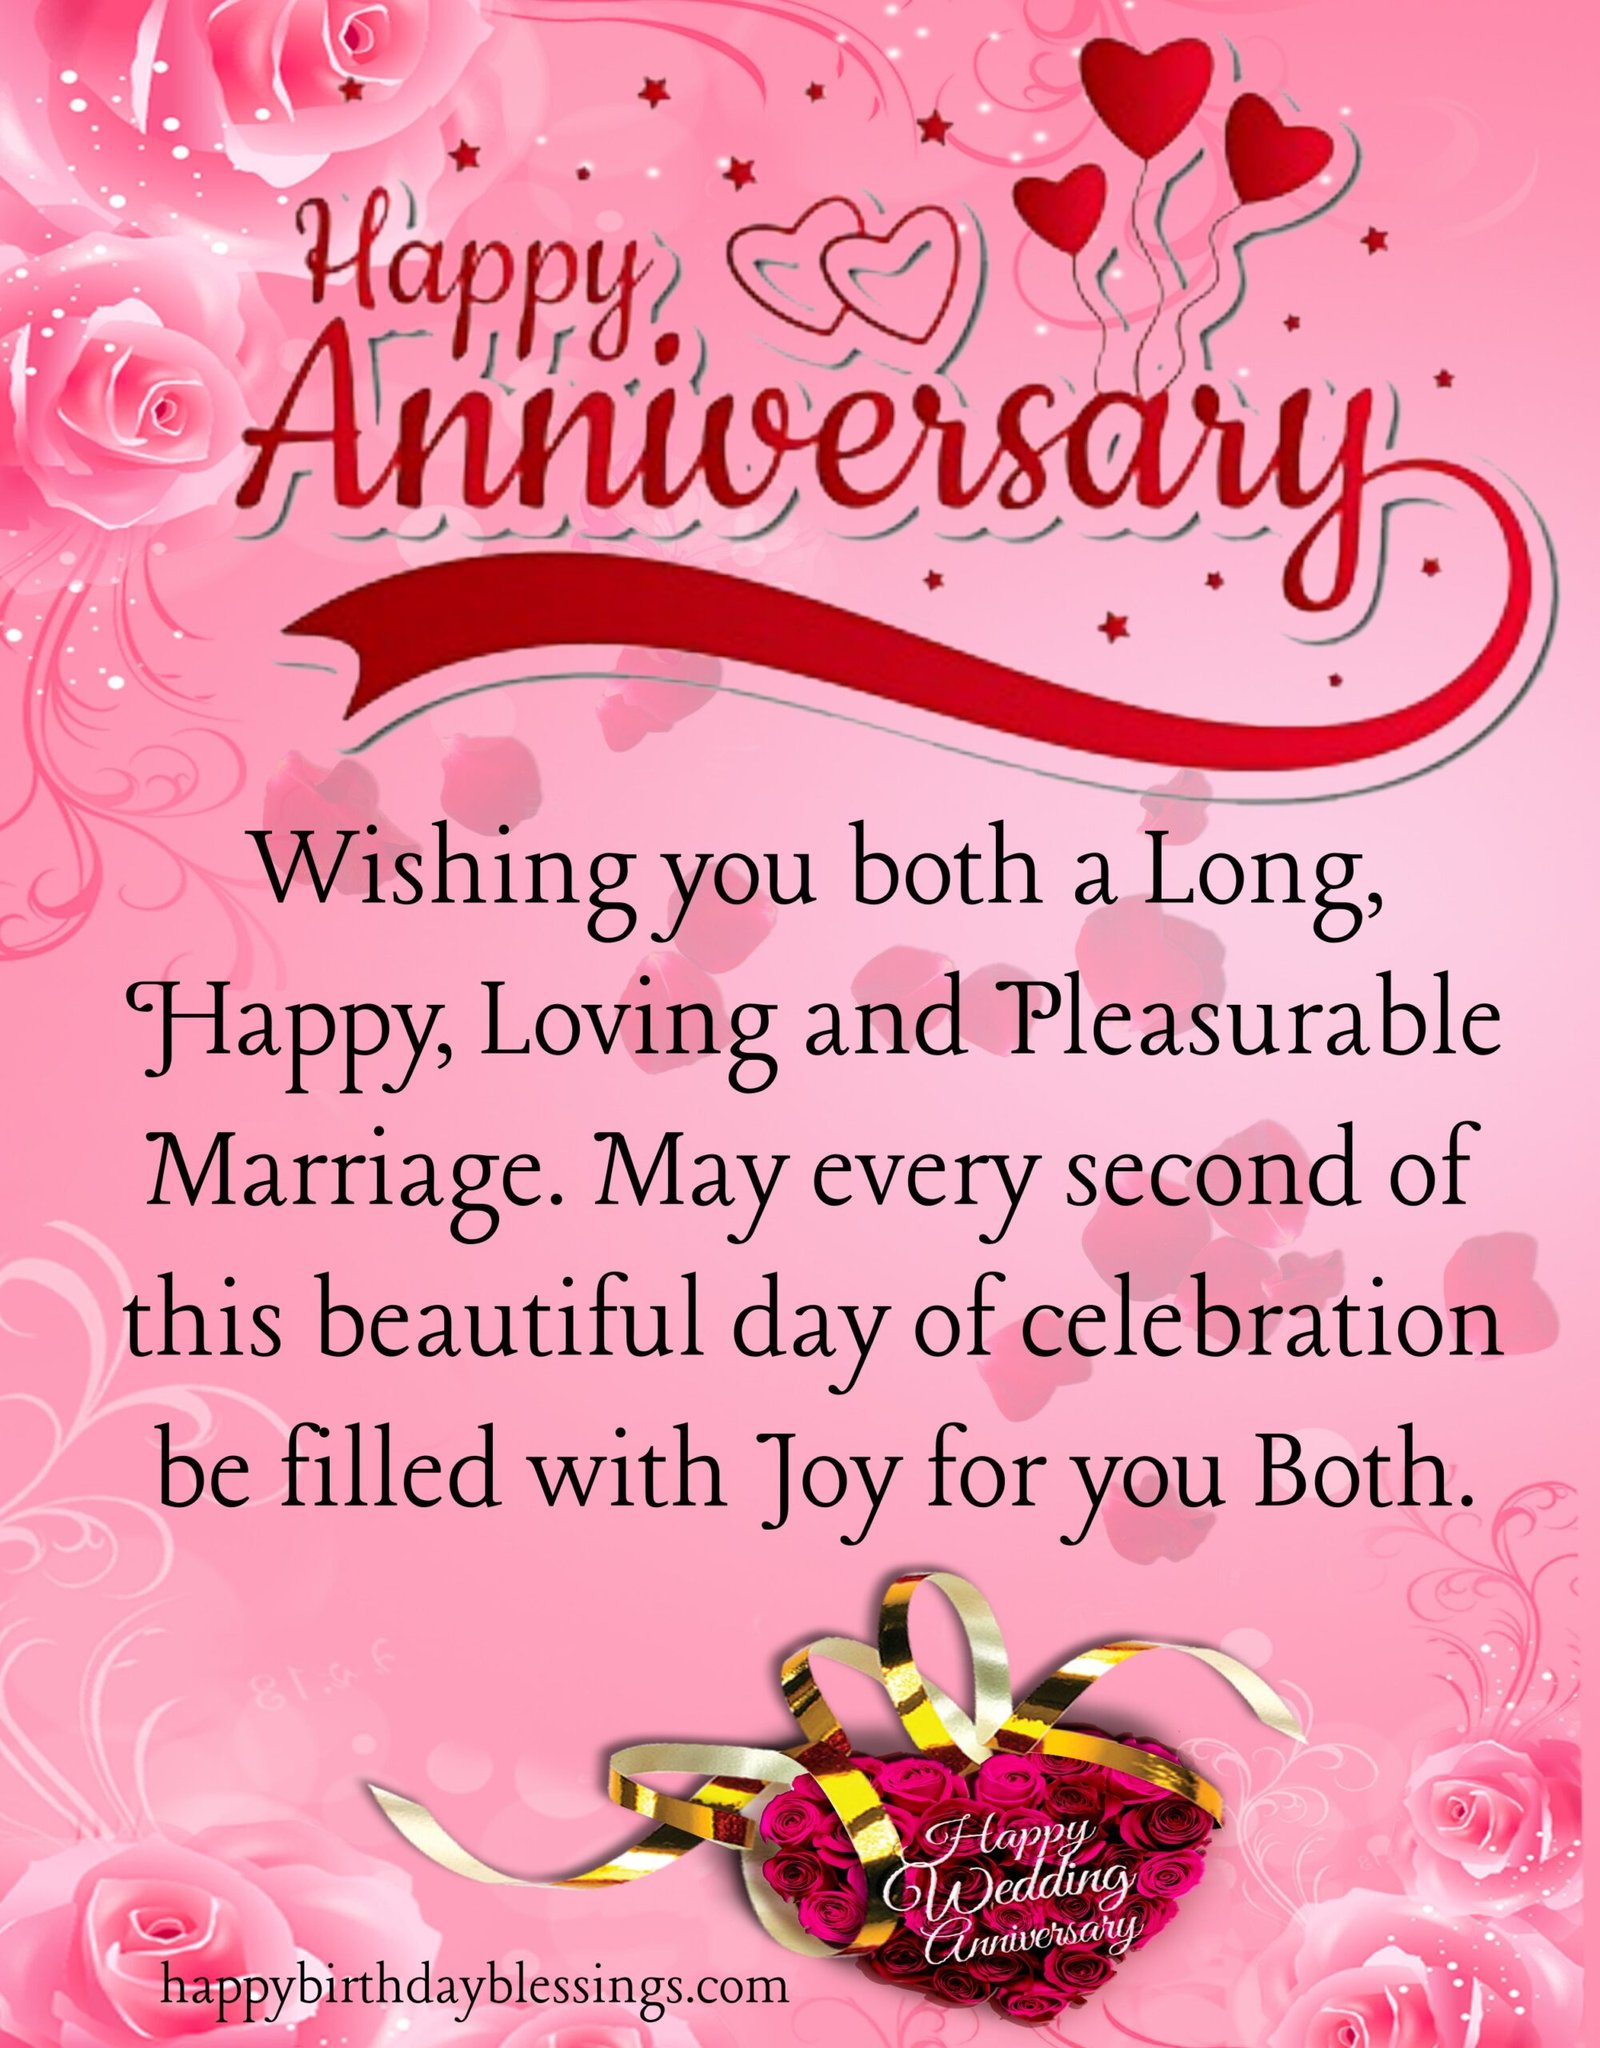 Celebrate Eternal Love with These Wedding Anniversary Wishes